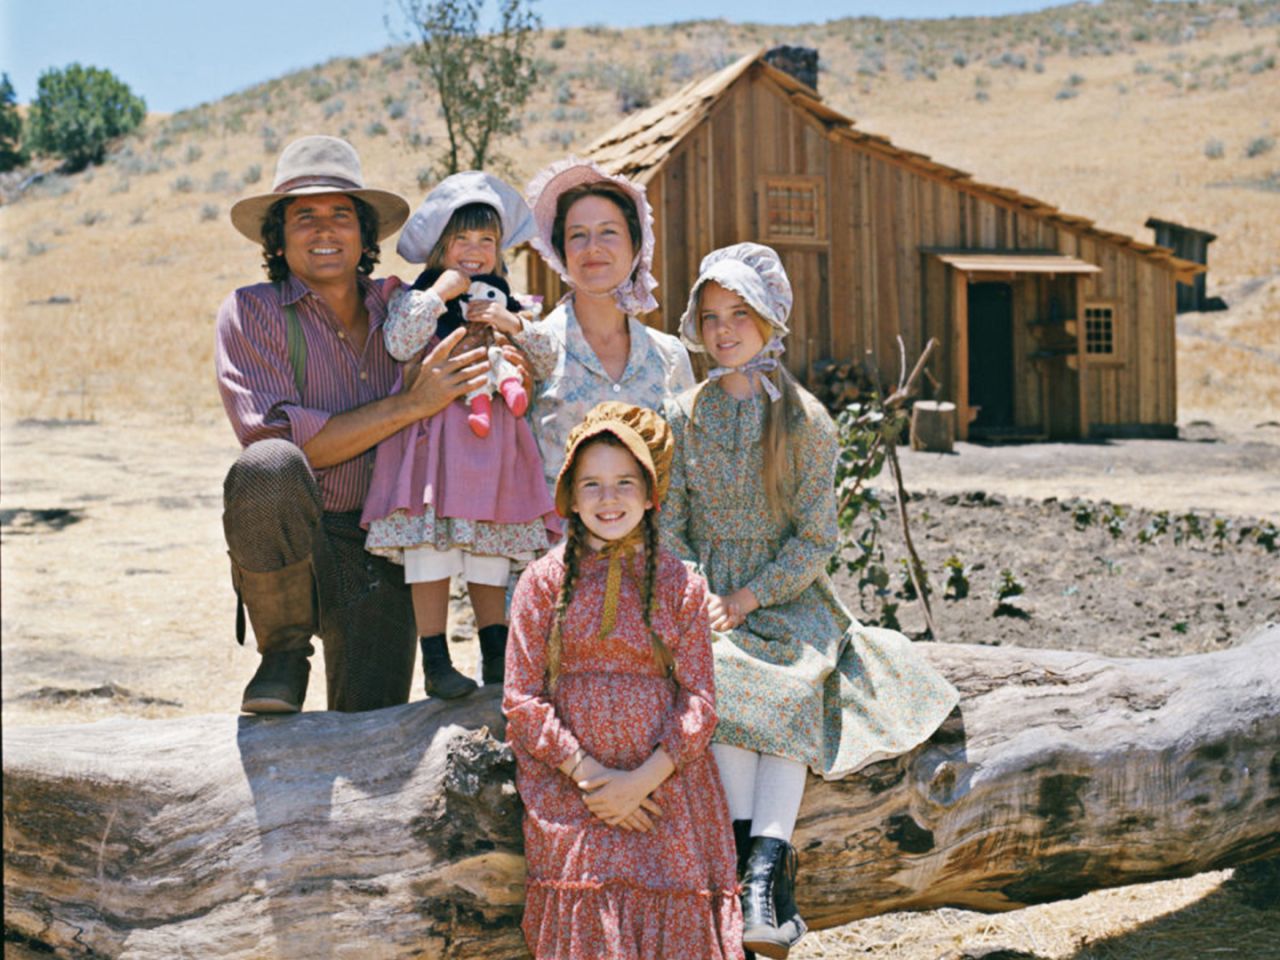 It's been more than 40 years since the beloved TV series "Little House on the Prairie" debuted on NBC. The show ran from 1974 to 1984, and it retains a huge fan base to this day. Here's what the residents of Walnut Grove are up to today.